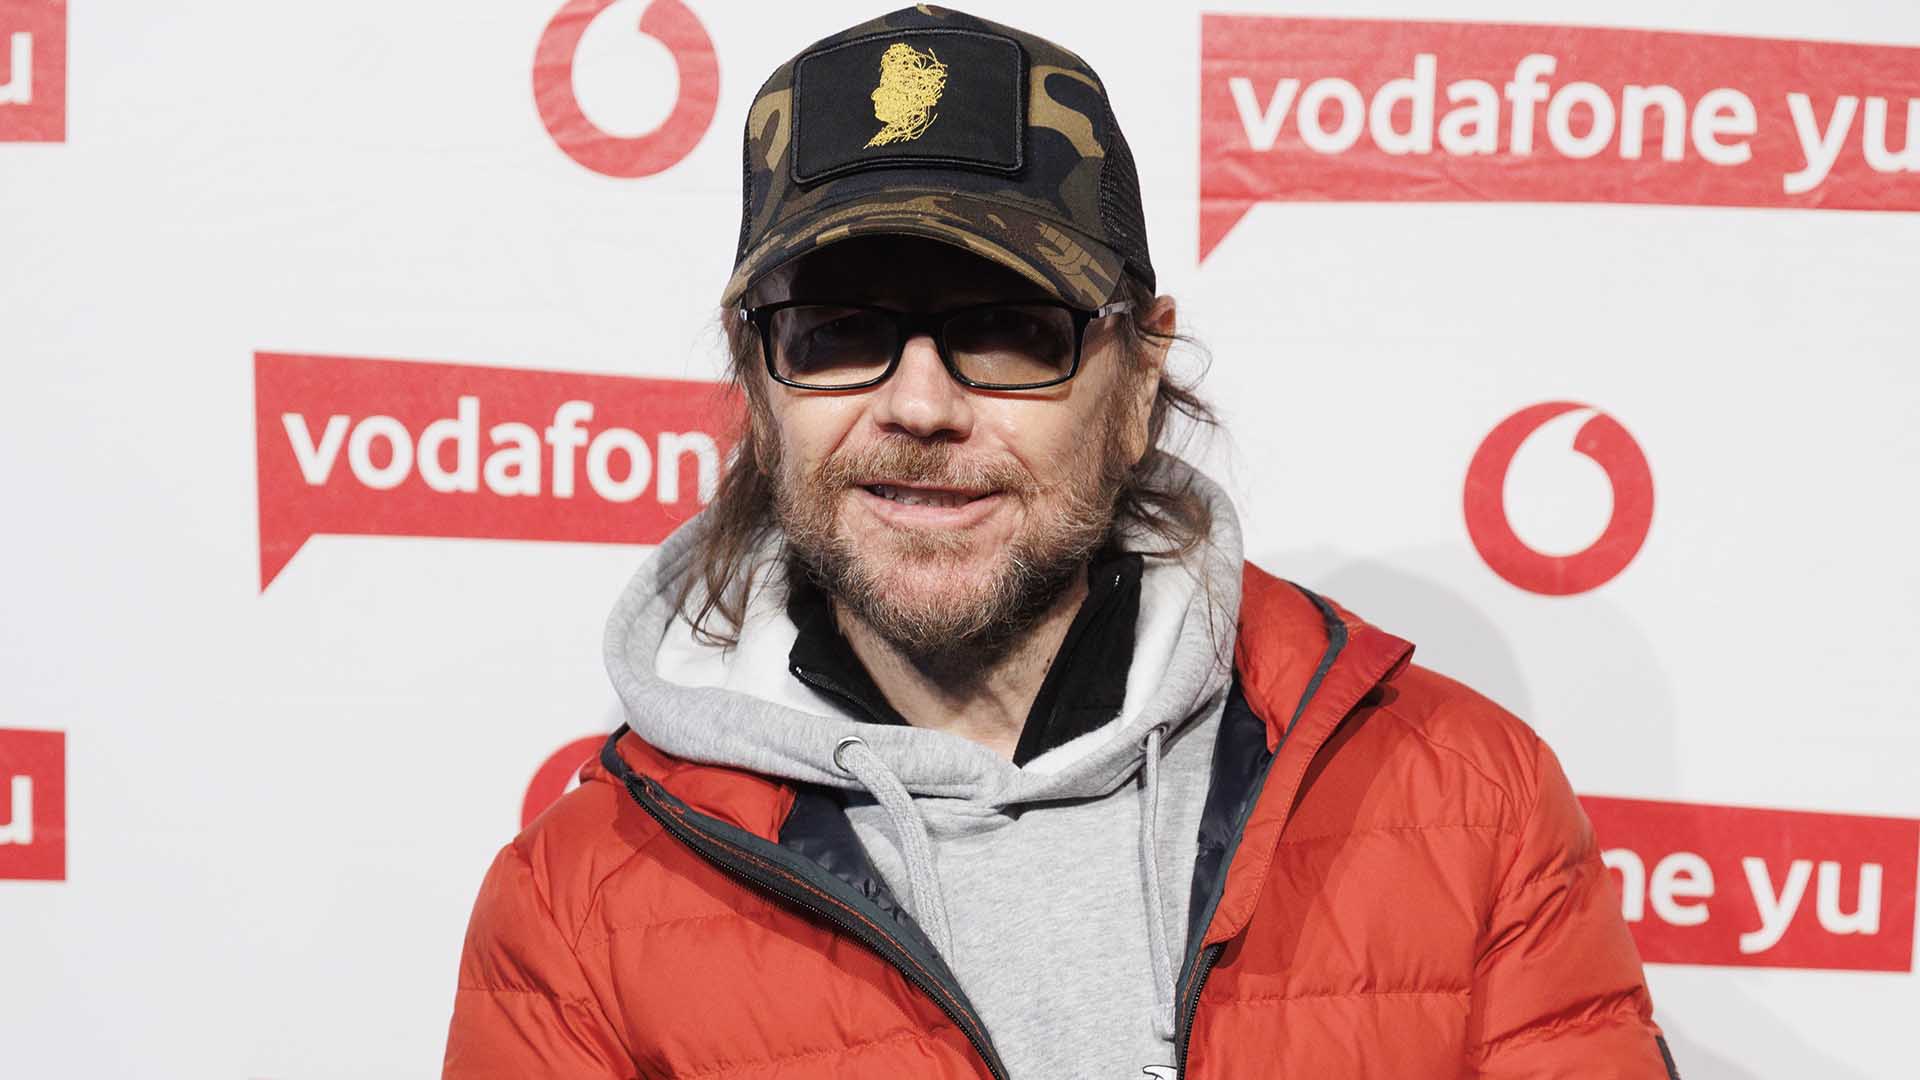 Actor Santiago Segura at photocall for Vodafone Yu Music Show in Madrid on Wednesday, 1 December 2021.